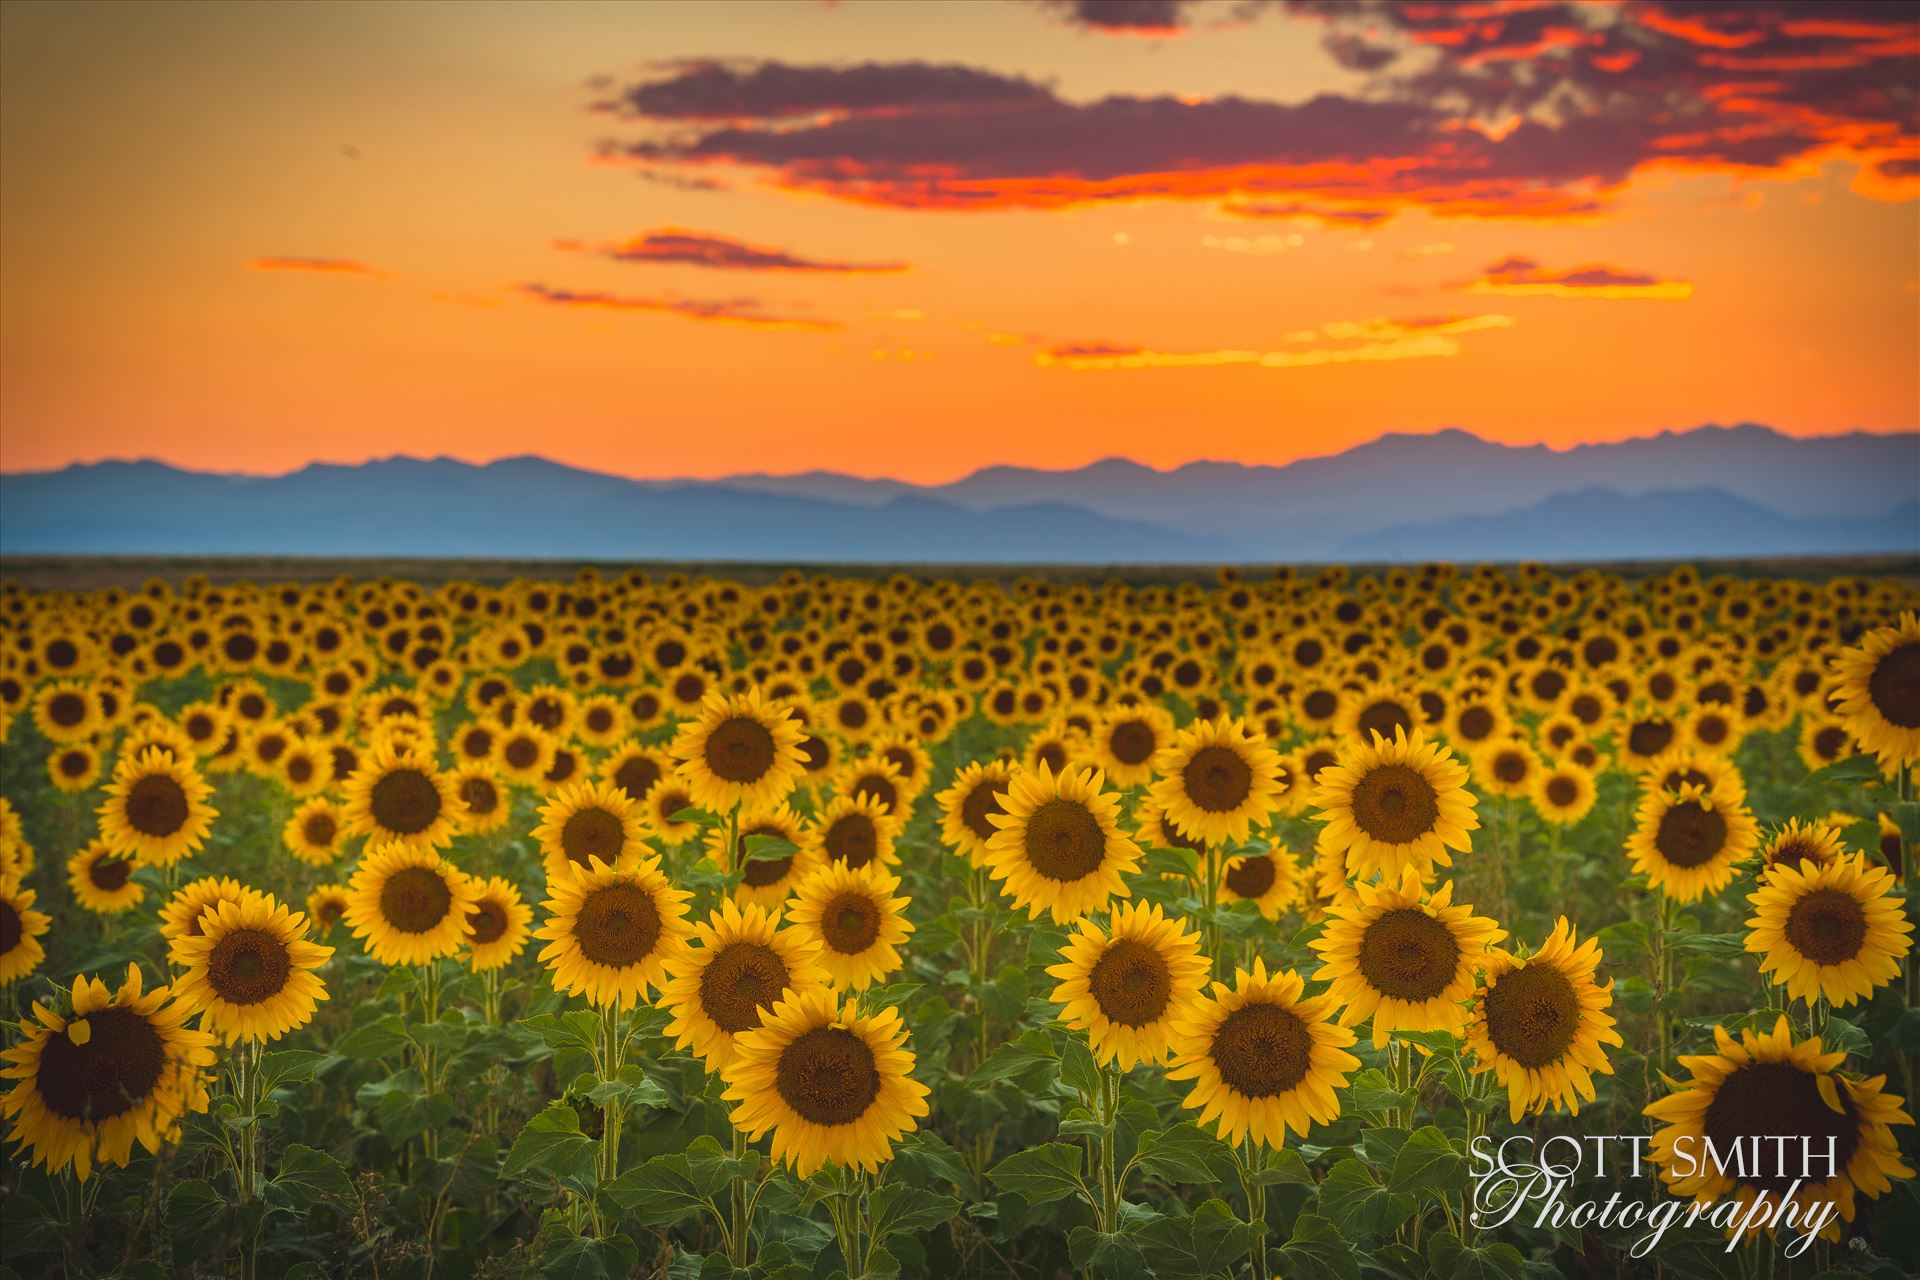 Denver Sunflowers at Sunset No 1 Sunflower fields near Denver International Airport, on August 20th, 2016.Near 56th and E470. by Scott Smith Photos